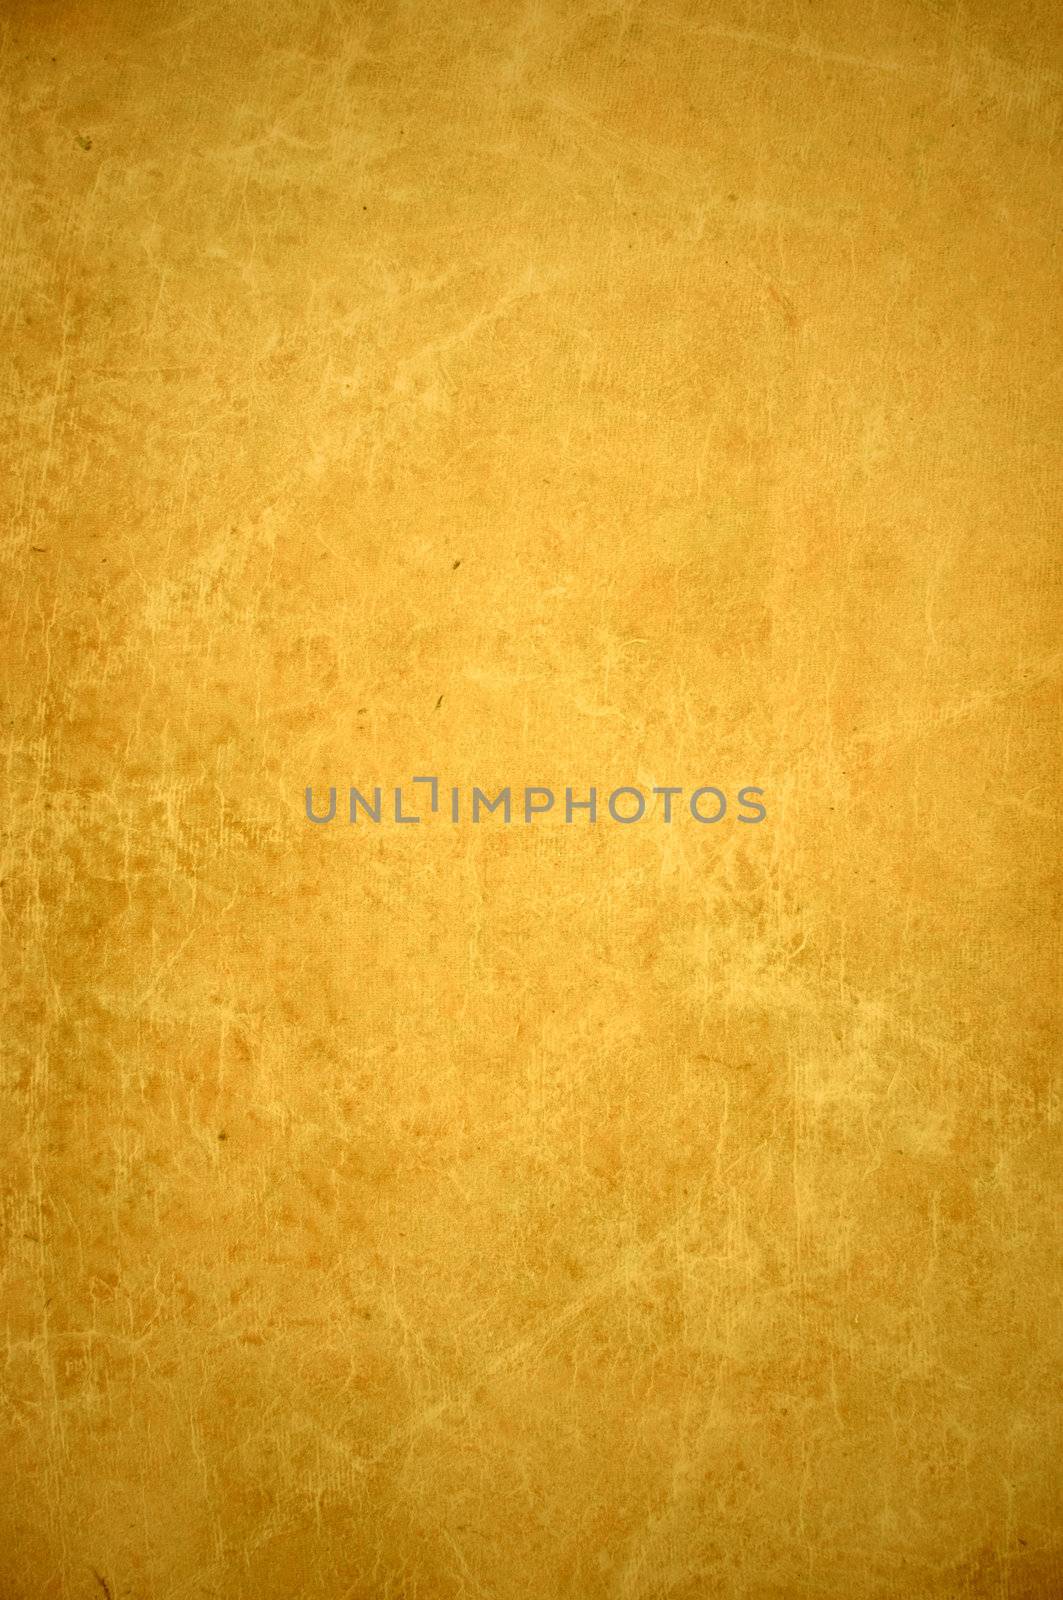 Old antique paper texture background